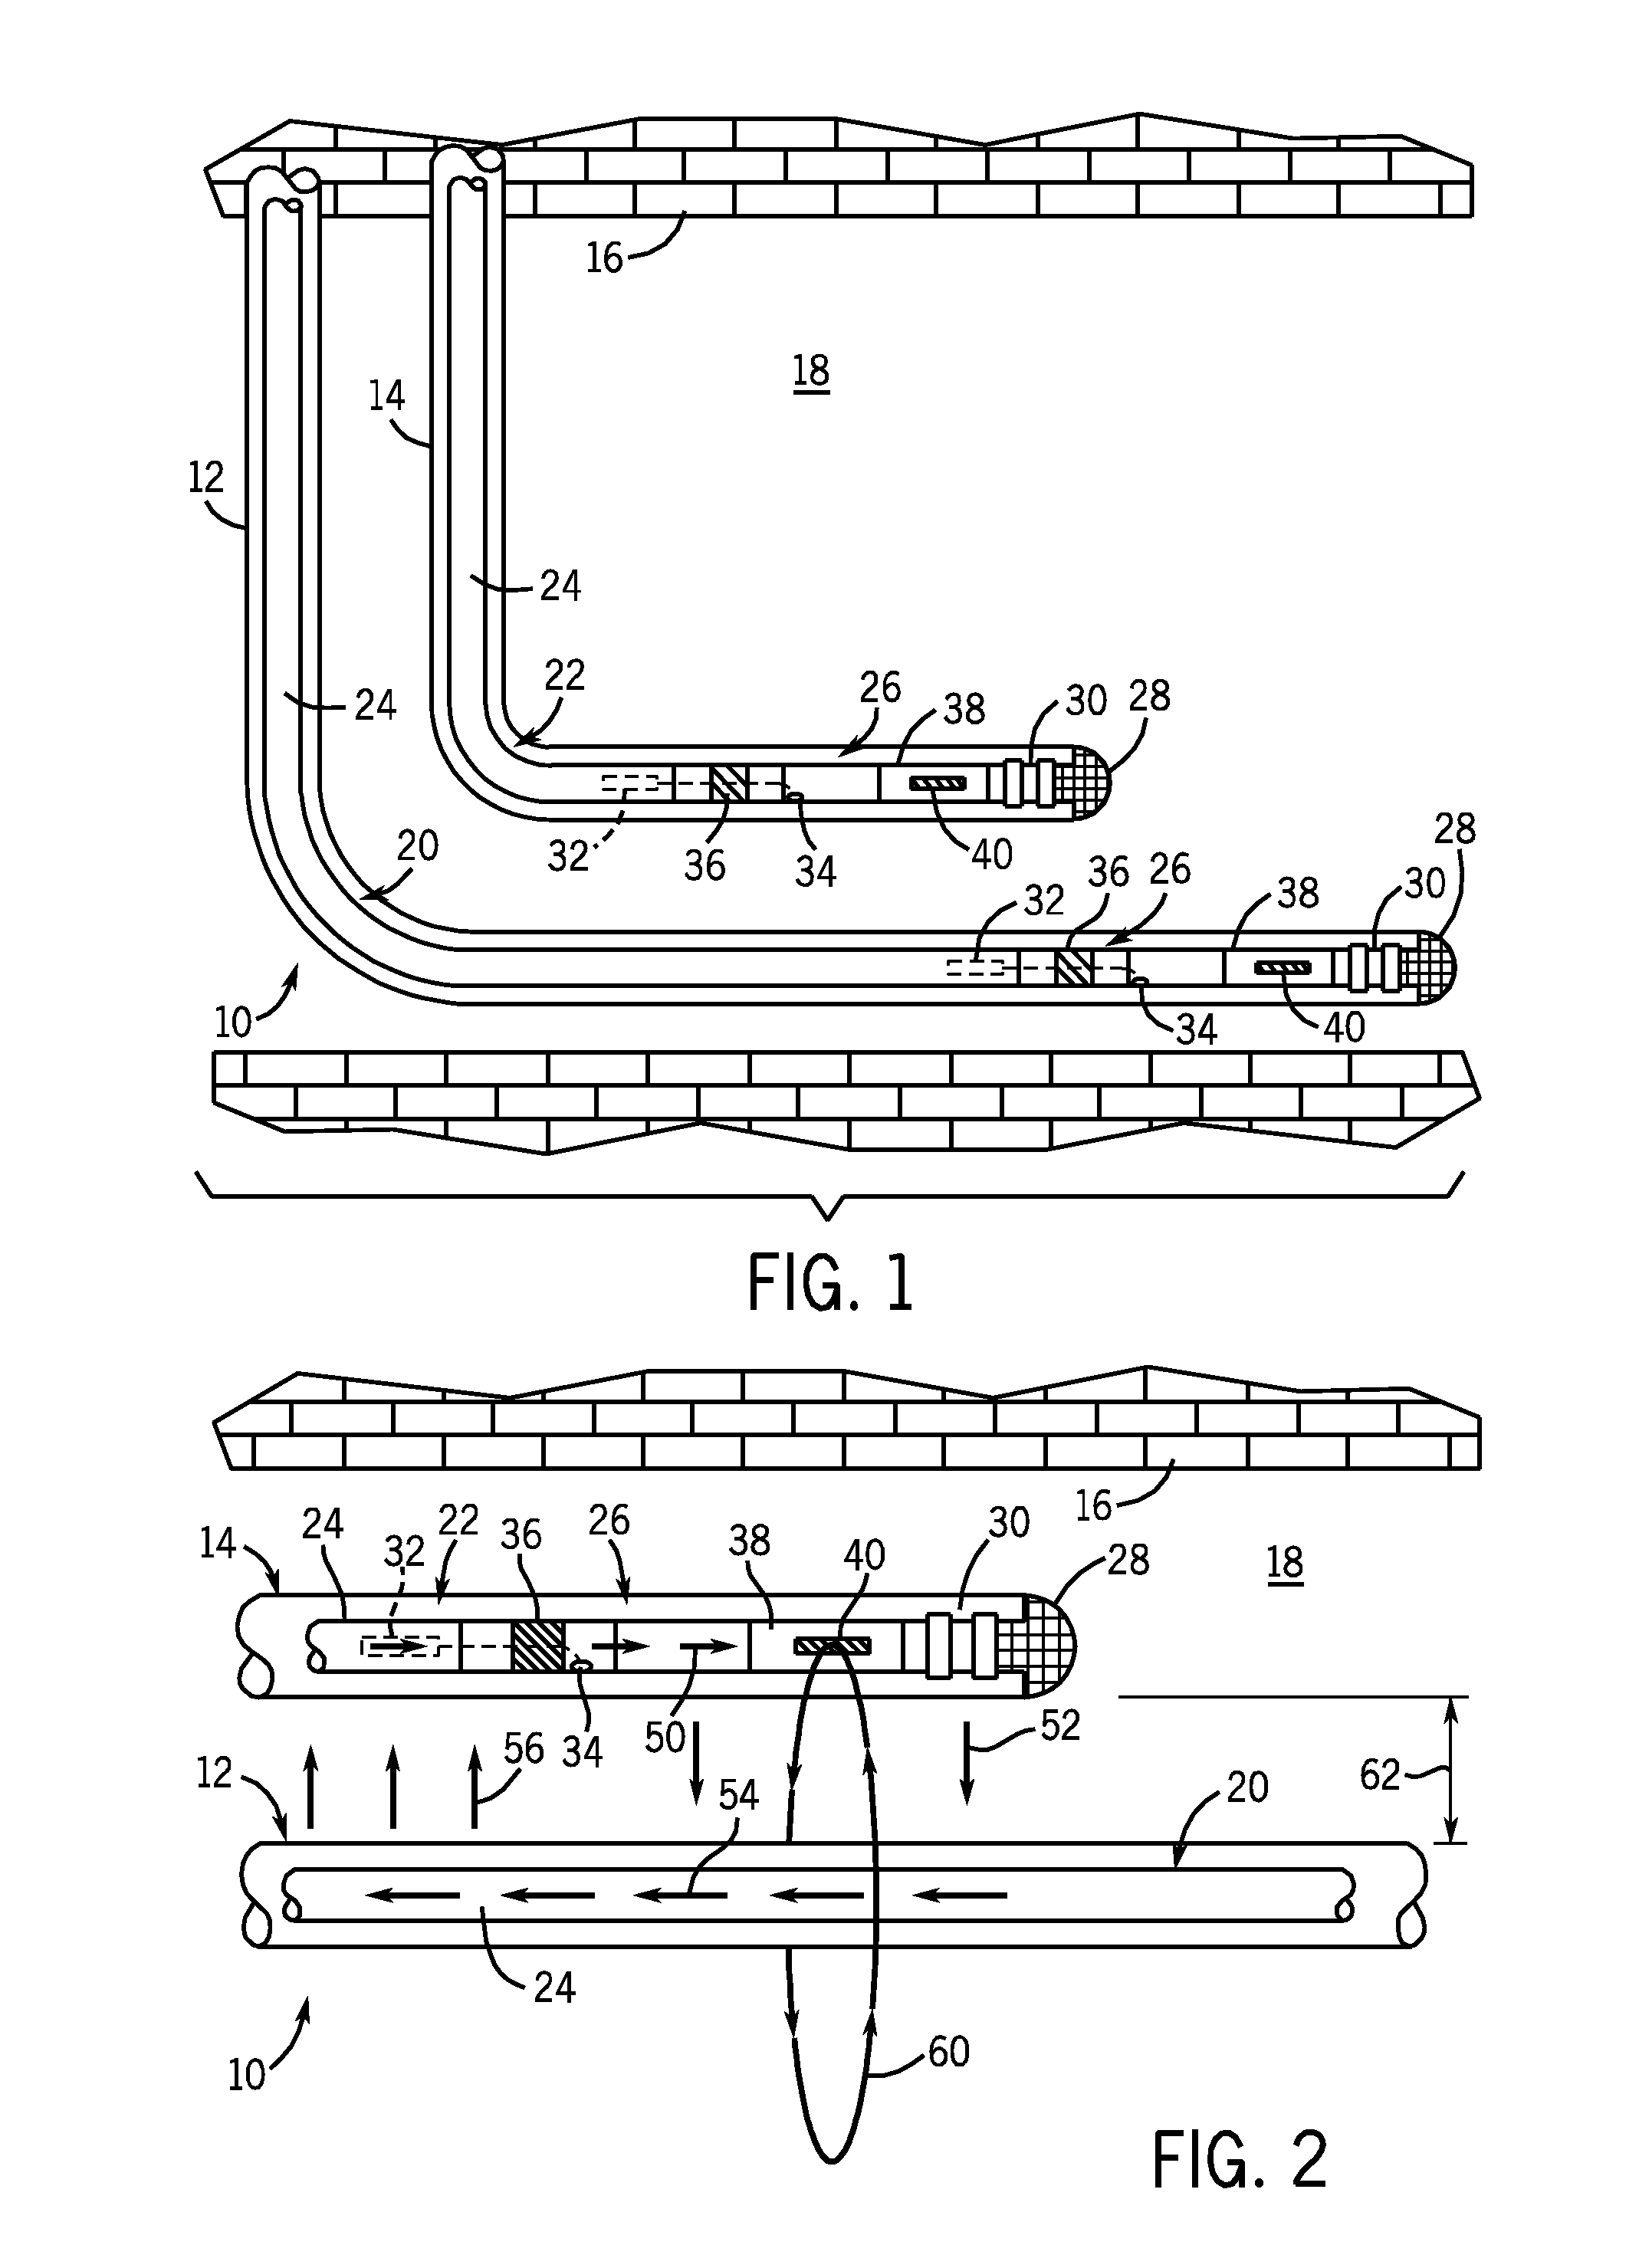 Method for drilling wells in close relationship using magnetic ranging while drilling